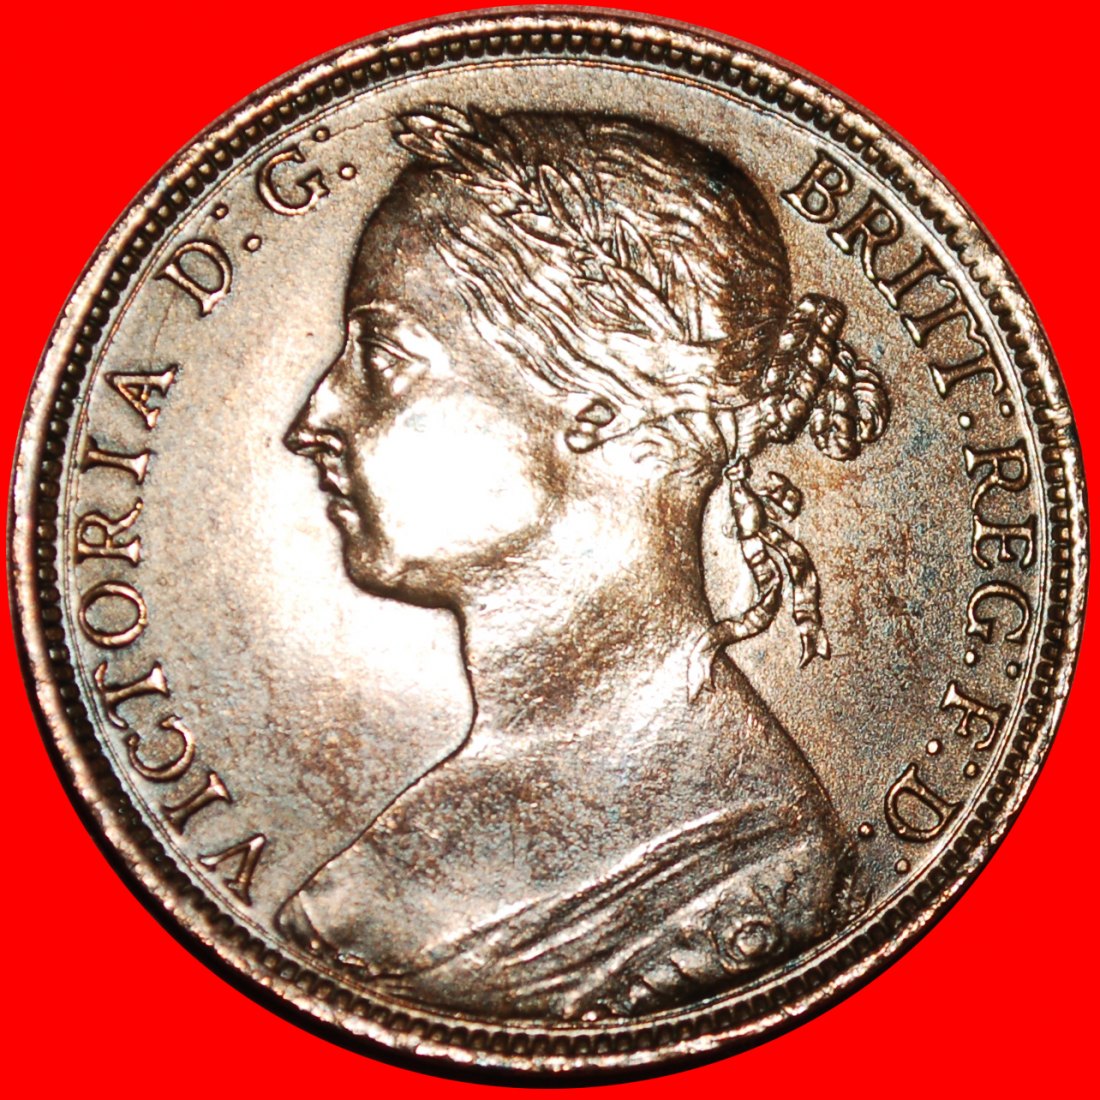  * 2 SOLD MISTRESS OF SEAS: GREAT BRITAIN★1 PENNY 1892★SHIP★VICTORIA 1837-1901★LOW START★ NO RESERVE!   